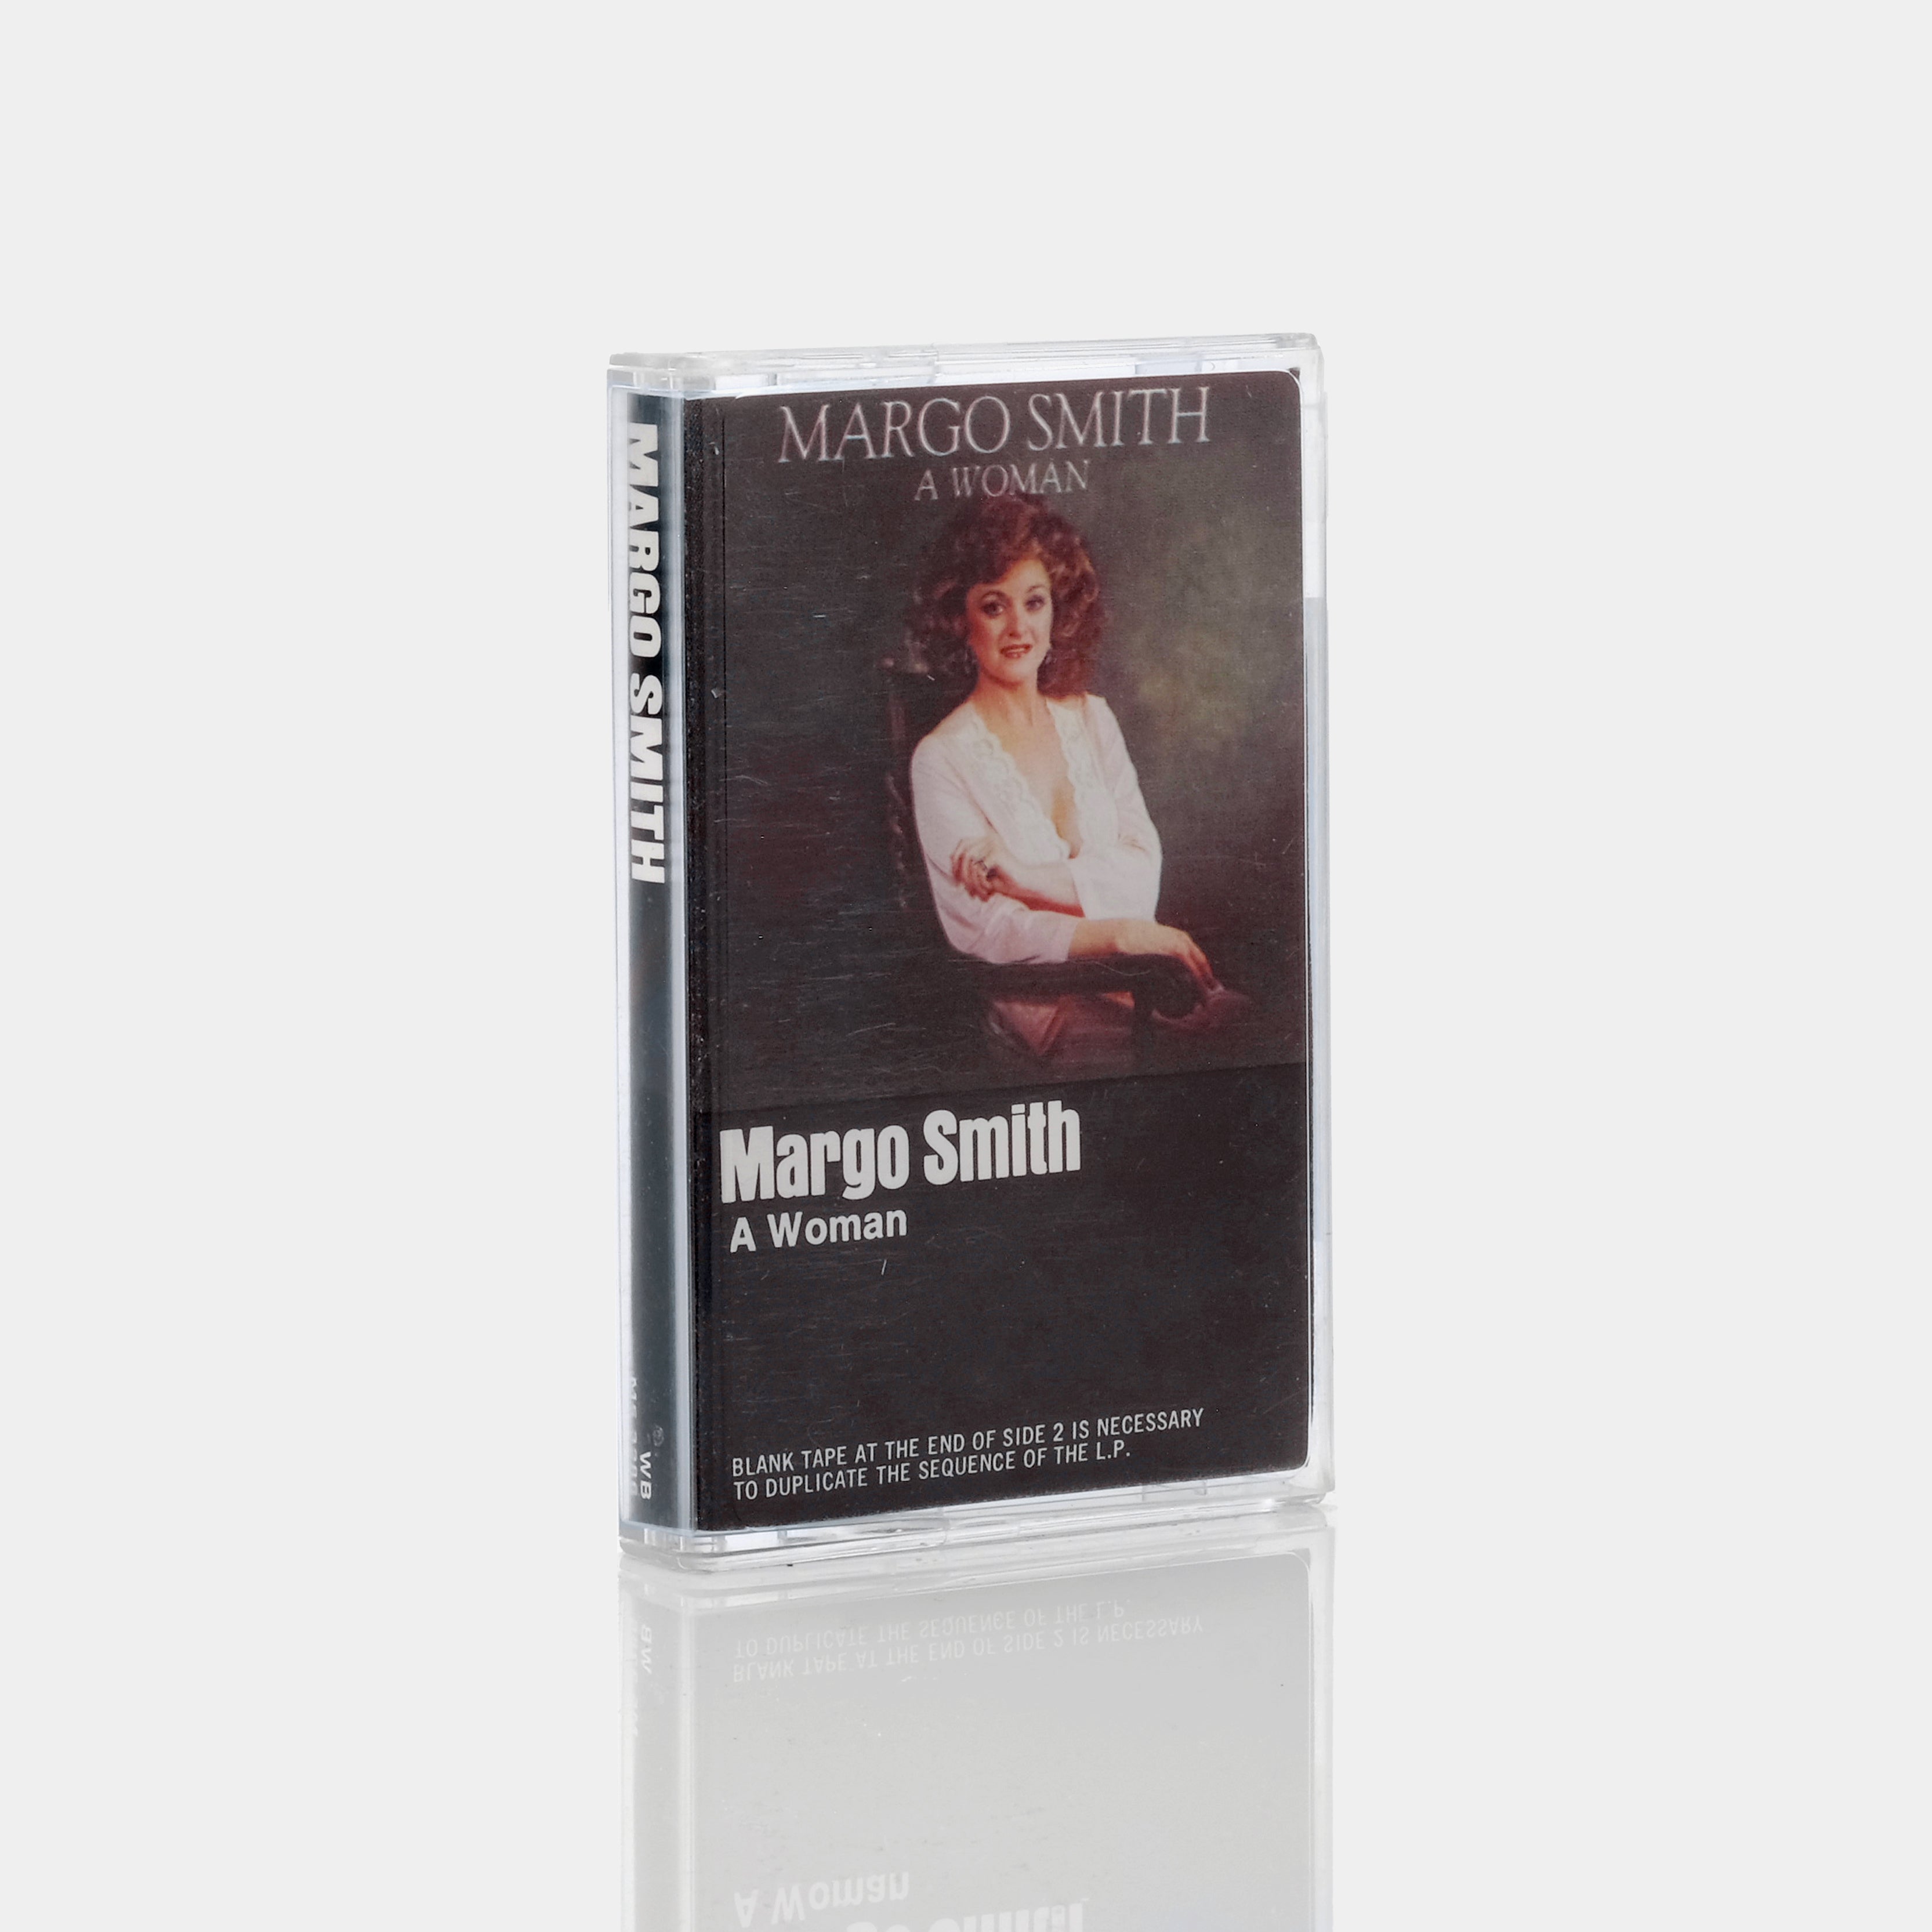 Margo Smith - A Woman Cassette Tape